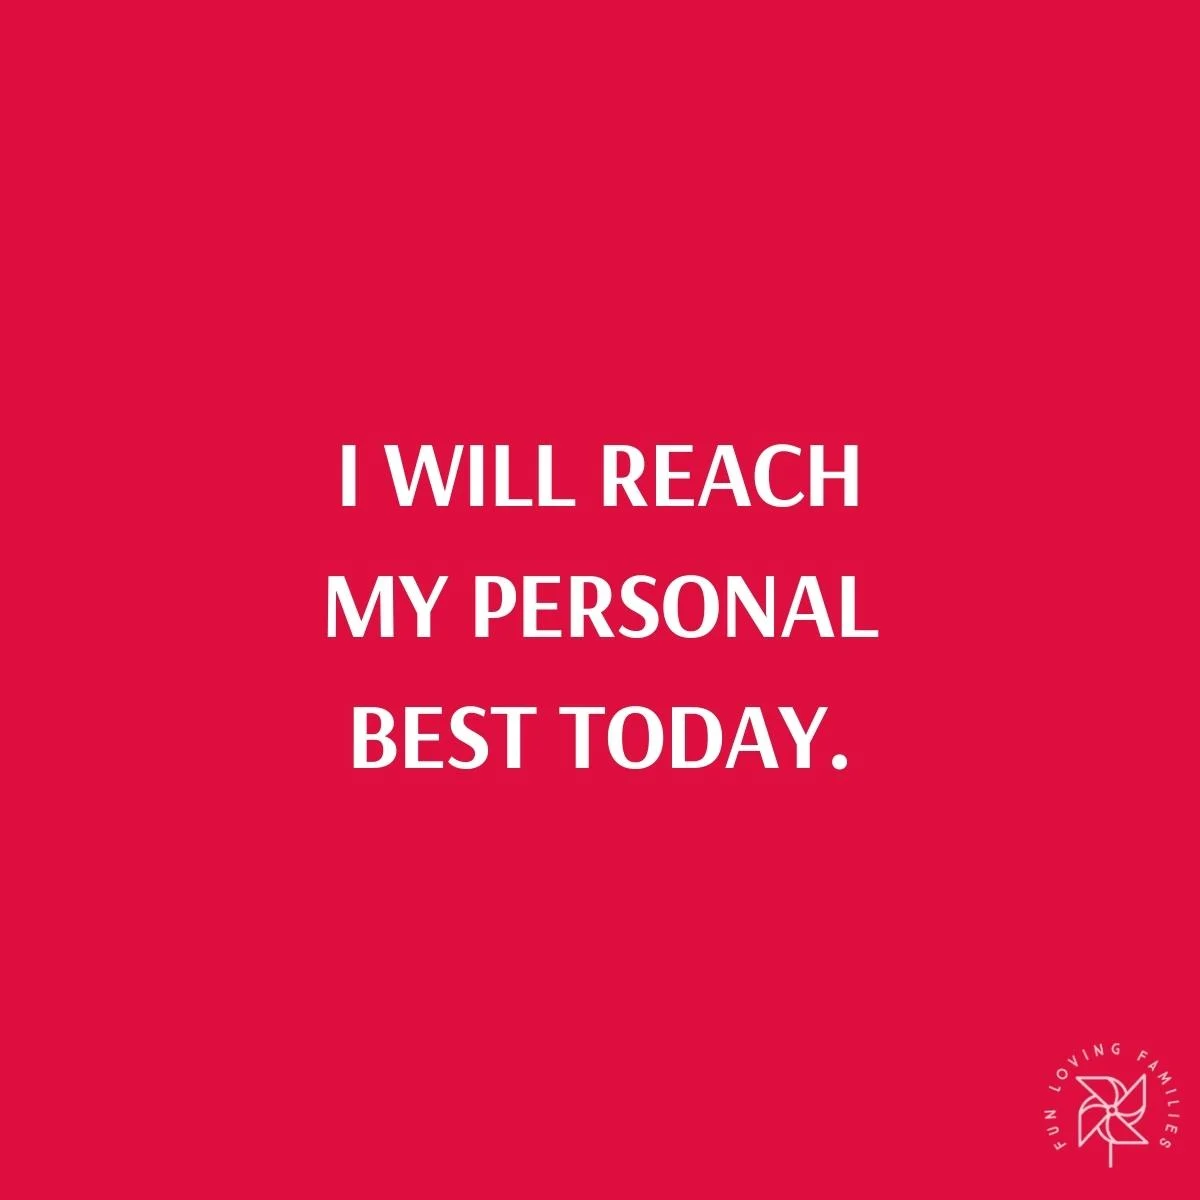 I will reach my personal best today affirmation